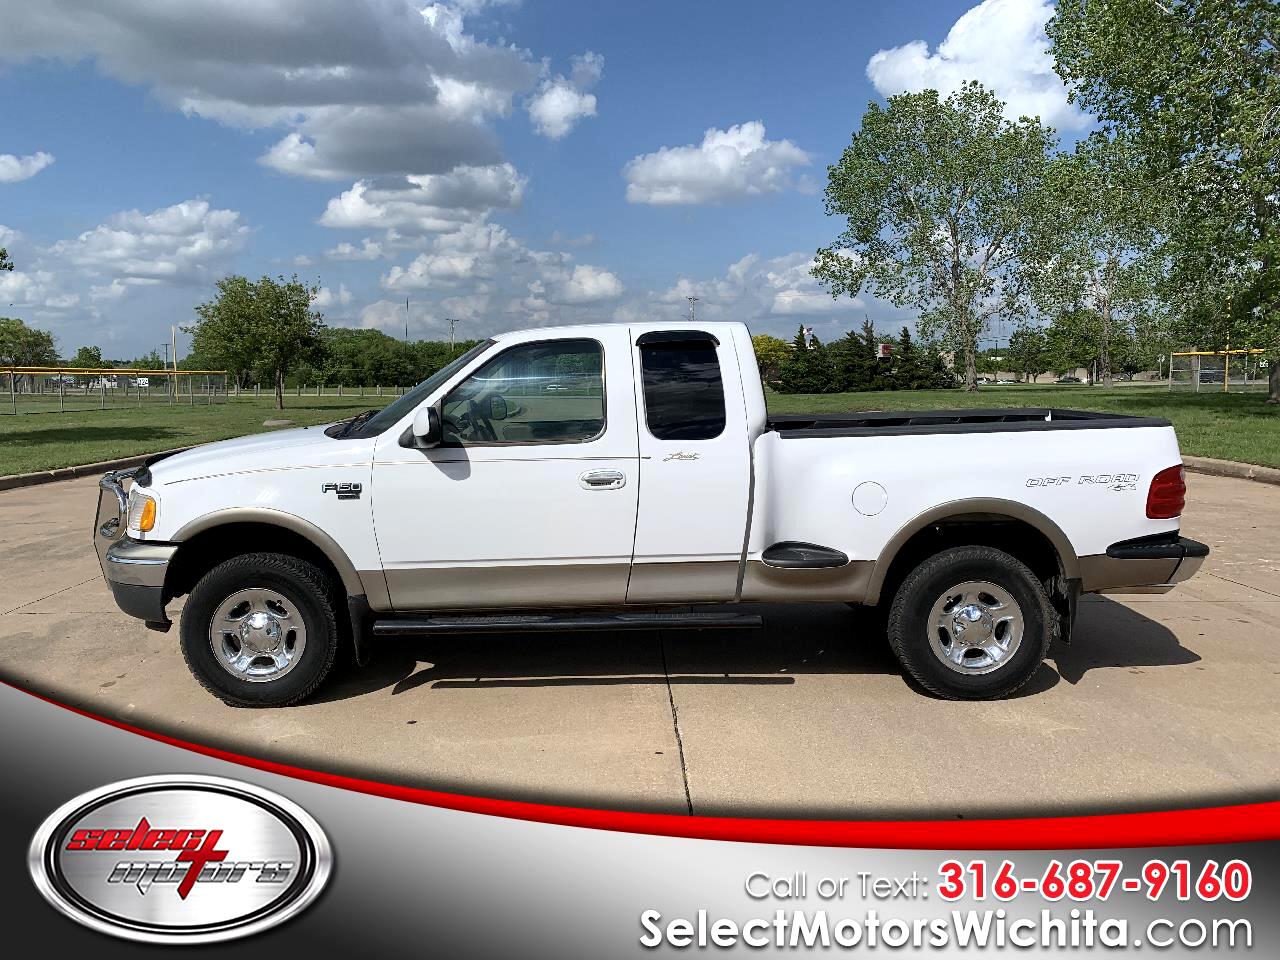 Used 2001 Ford F-150 Supercab Flareside 139" Lariat 4WD for Sale in 2001 Ford F150 Triton V8 Towing Capacity